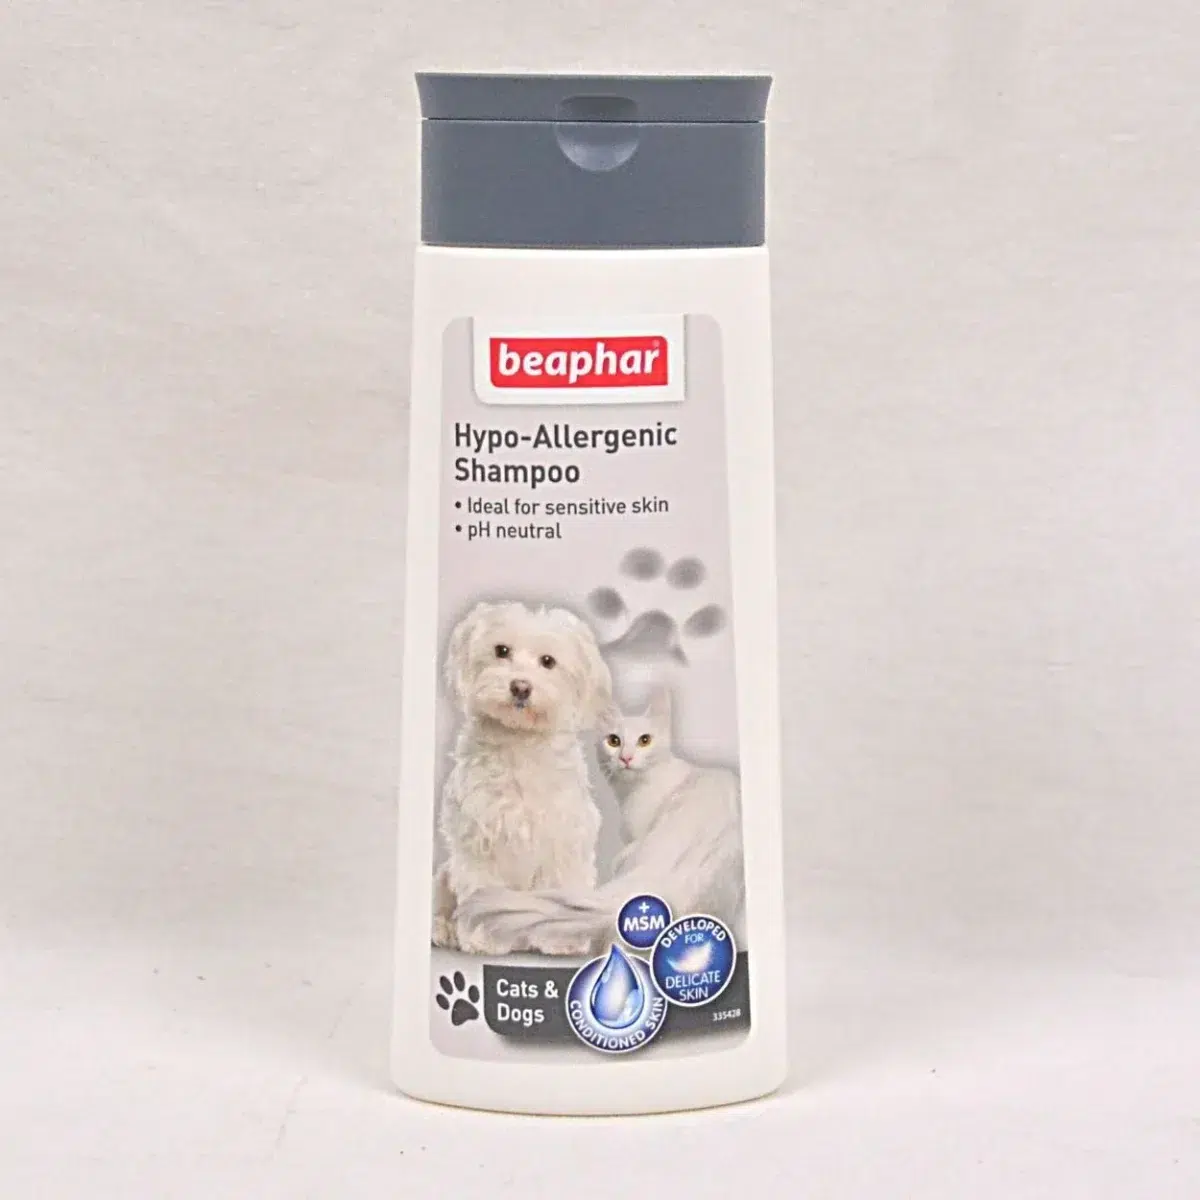 beaphar-hypo-allergenic-shampoo-for-dog-250ml-grooming-shampoo-and-conditioner-perfect-coat-811851